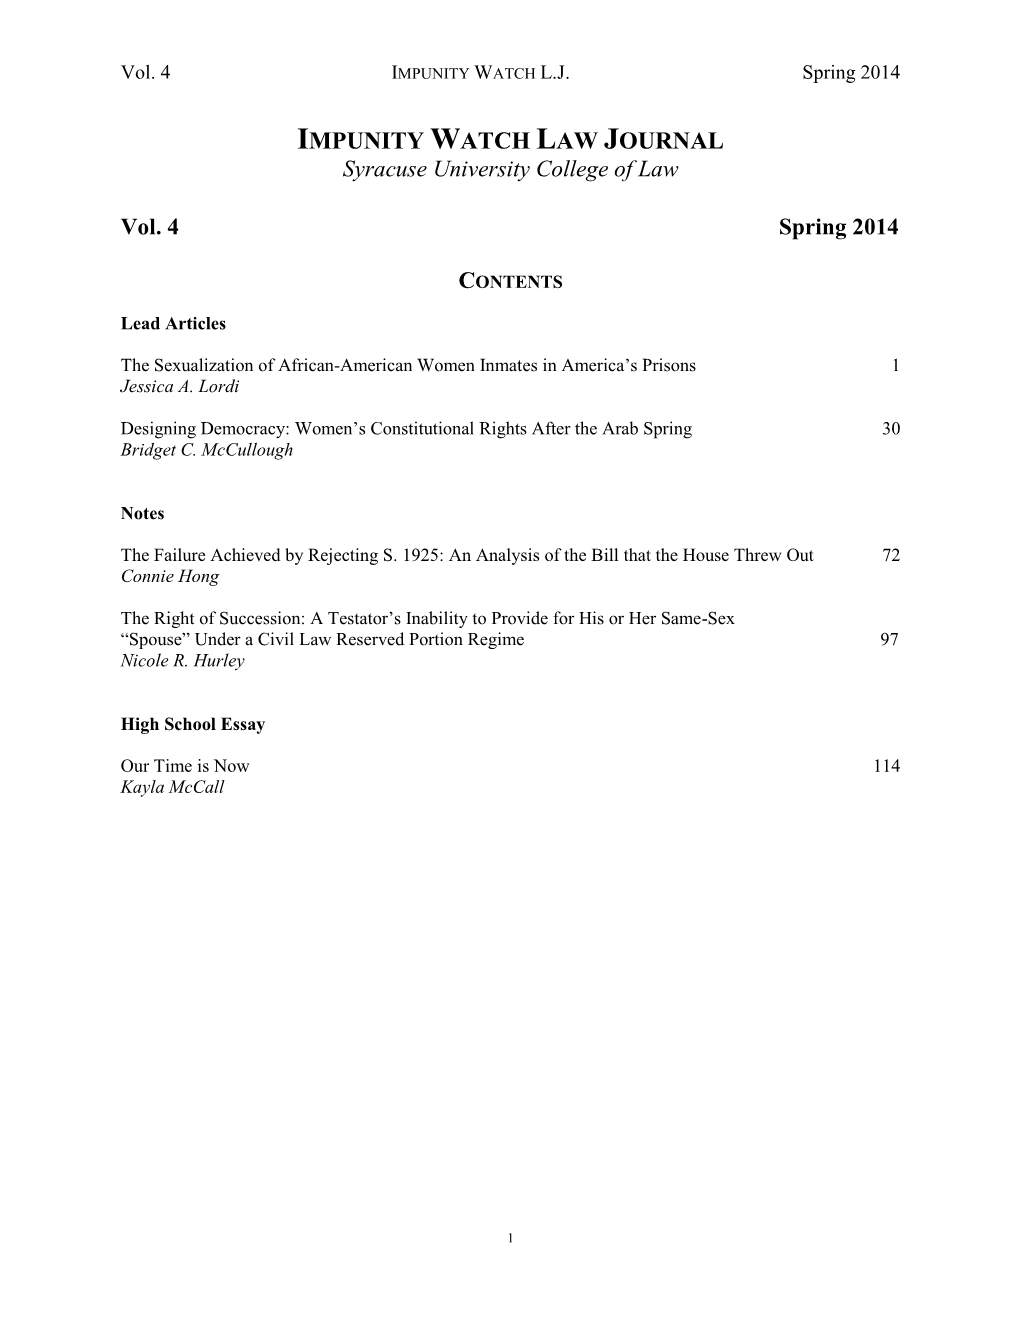 Syracuse University College of Law Vol. 4 Spring 2014 CONTENTS